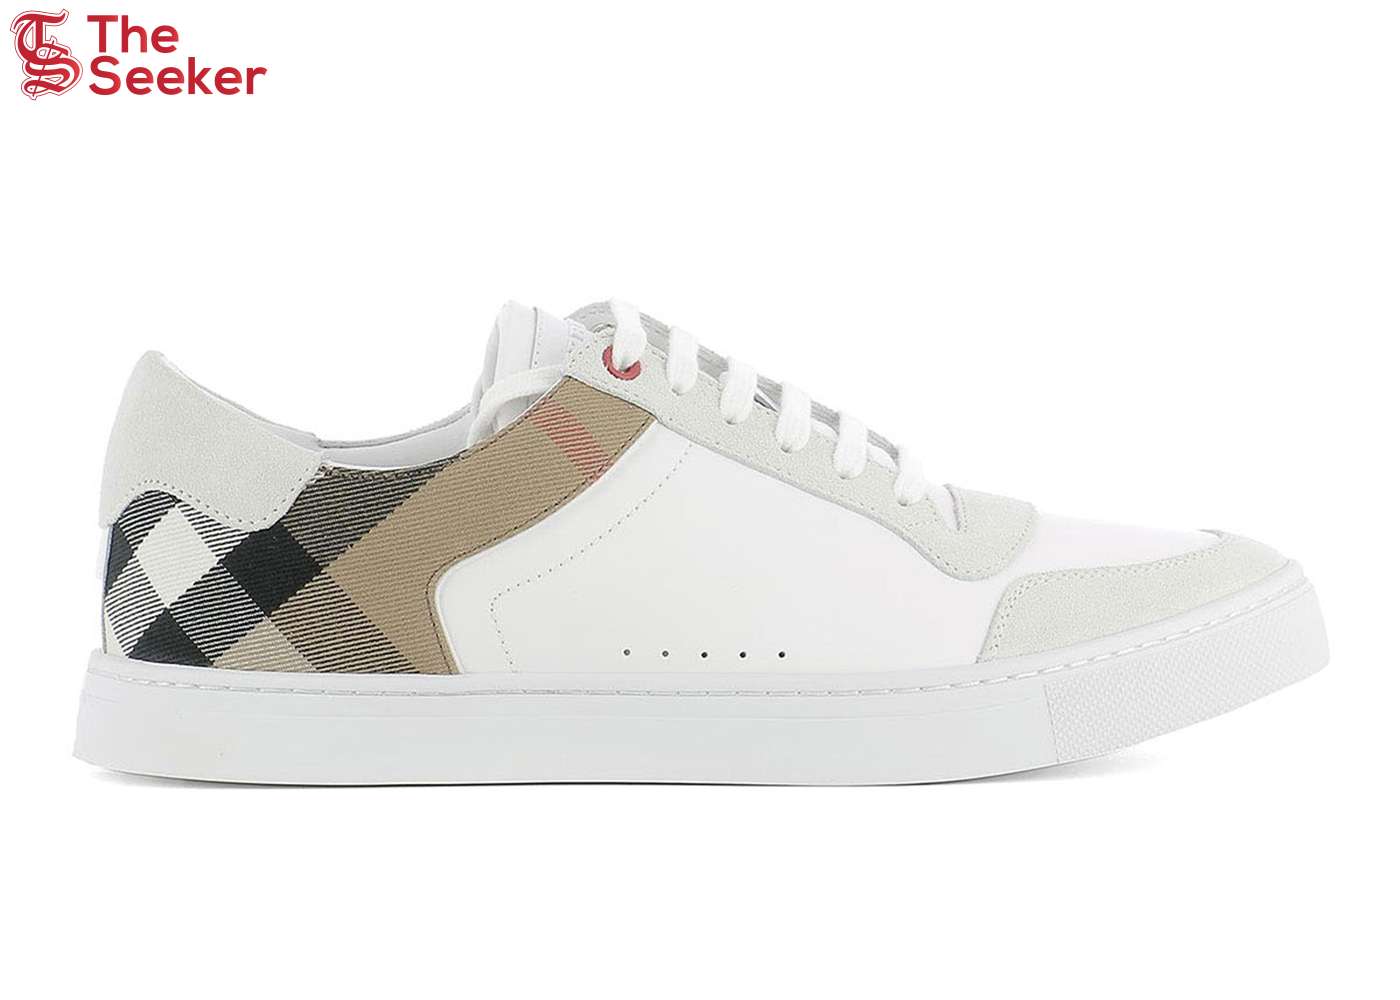 Burberry Leather Suede and House Check Sneakers Optic White